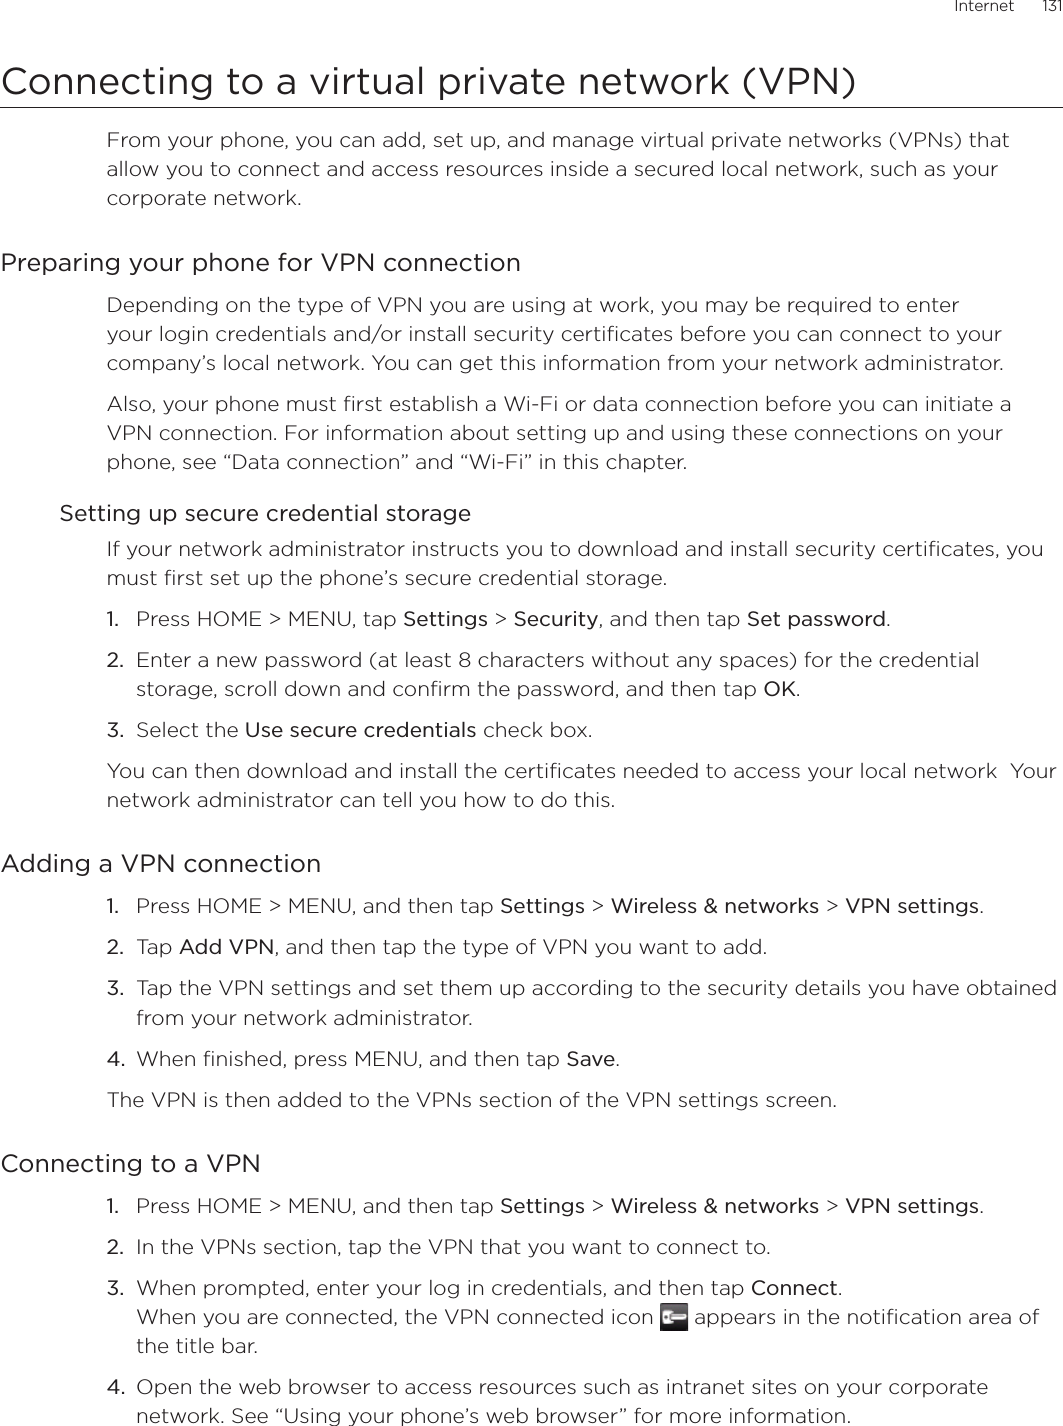 Internet      131Connecting to a virtual private network (VPN)From your phone, you can add, set up, and manage virtual private networks (VPNs) that allow you to connect and access resources inside a secured local network, such as your corporate network.Preparing your phone for VPN connectionDepending on the type of VPN you are using at work, you may be required to enter your login credentials and/or install security certificates before you can connect to your company’s local network. You can get this information from your network administrator. Also, your phone must first establish a Wi-Fi or data connection before you can initiate a VPN connection. For information about setting up and using these connections on your phone, see “Data connection” and “Wi-Fi” in this chapter.Setting up secure credential storageIf your network administrator instructs you to download and install security certificates, you must first set up the phone’s secure credential storage.Press HOME &gt; MENU, tap Settings &gt; Security, and then tap Set password.Enter a new password (at least 8 characters without any spaces) for the credential storage, scroll down and confirm the password, and then tap OK.Select the Use secure credentials check box.You can then download and install the certificates needed to access your local network  Your network administrator can tell you how to do this.Adding a VPN connectionPress HOME &gt; MENU, and then tap Settings &gt; Wireless &amp; networks &gt; VPN settings.Tap Add VPN, and then tap the type of VPN you want to add.Tap the VPN settings and set them up according to the security details you have obtained from your network administrator.When finished, press MENU, and then tap Save.The VPN is then added to the VPNs section of the VPN settings screen.Connecting to a VPNPress HOME &gt; MENU, and then tap Settings &gt; Wireless &amp; networks &gt; VPN settings.In the VPNs section, tap the VPN that you want to connect to.When prompted, enter your log in credentials, and then tap Connect. When you are connected, the VPN connected icon   appears in the notification area of the title bar.Open the web browser to access resources such as intranet sites on your corporate network. See “Using your phone’s web browser” for more information.1.2.3.1.2.3.4.1.2.3.4.